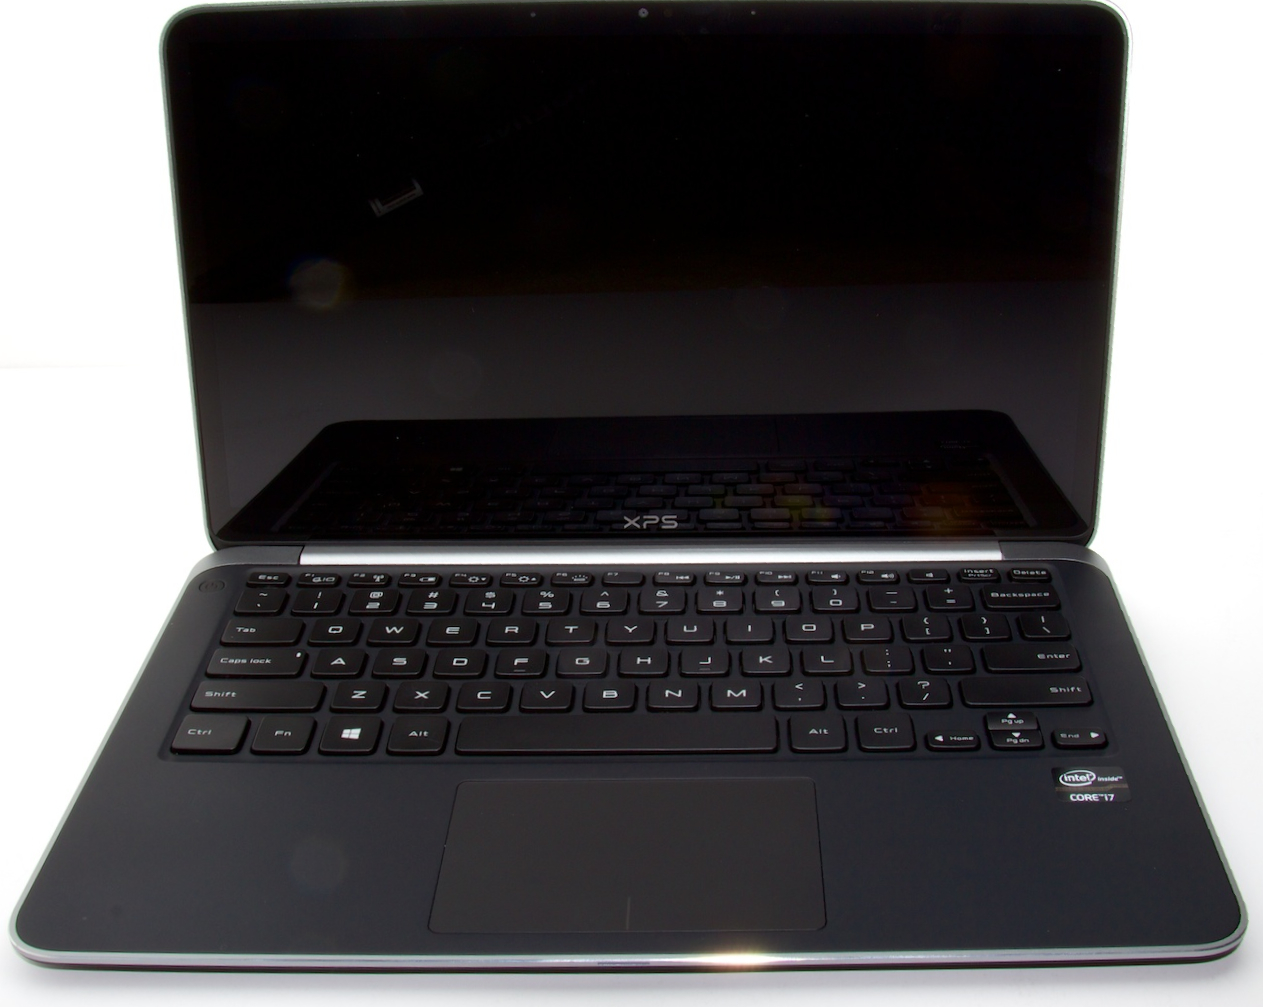 The XPS 13 Developer Edition. Black is the predominant color, drawing 